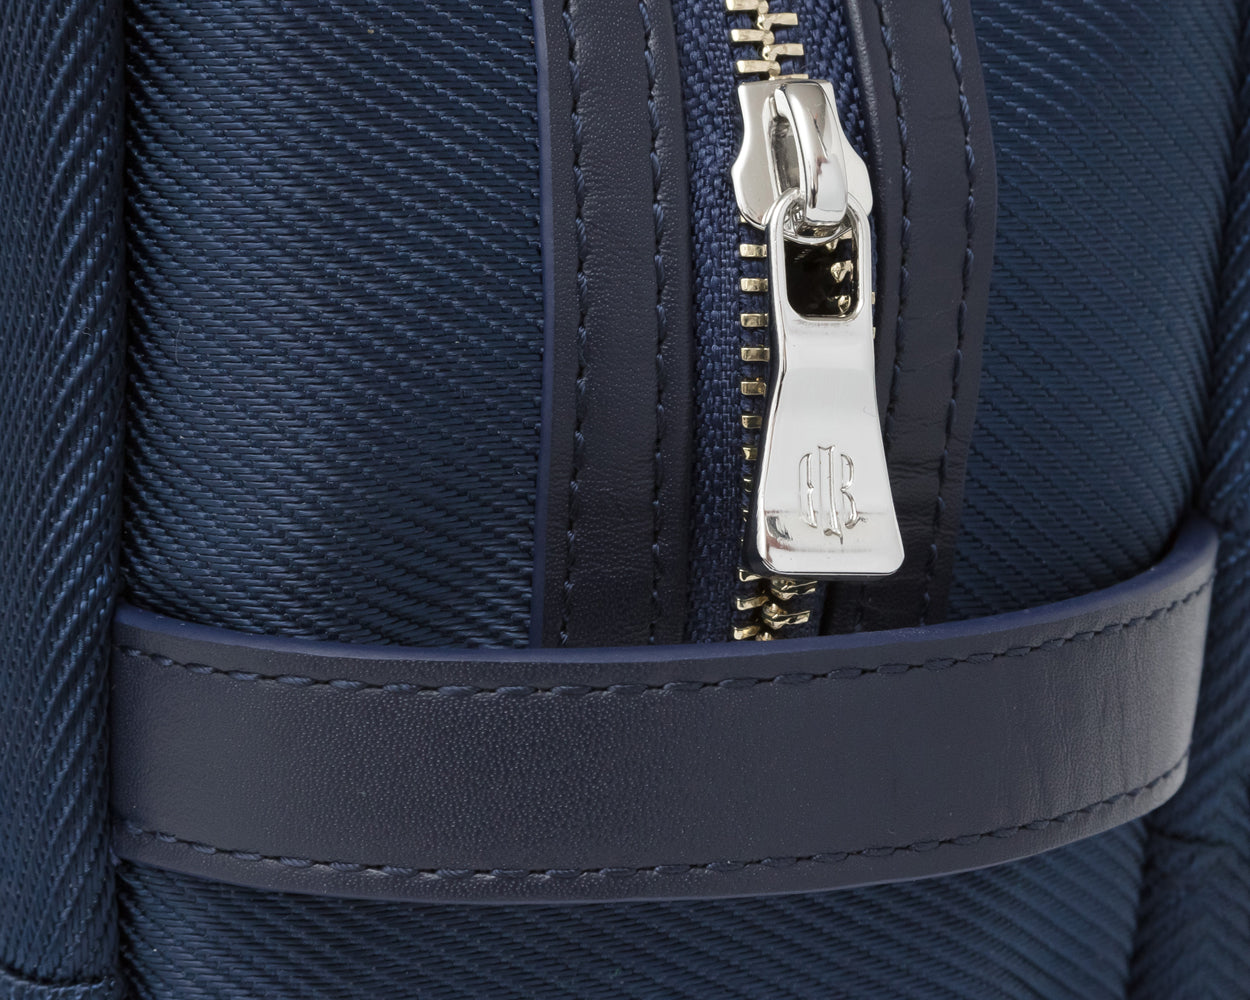 Close up on silver zipper and leather detailing on navy Holderness and Bourne dopp kit.